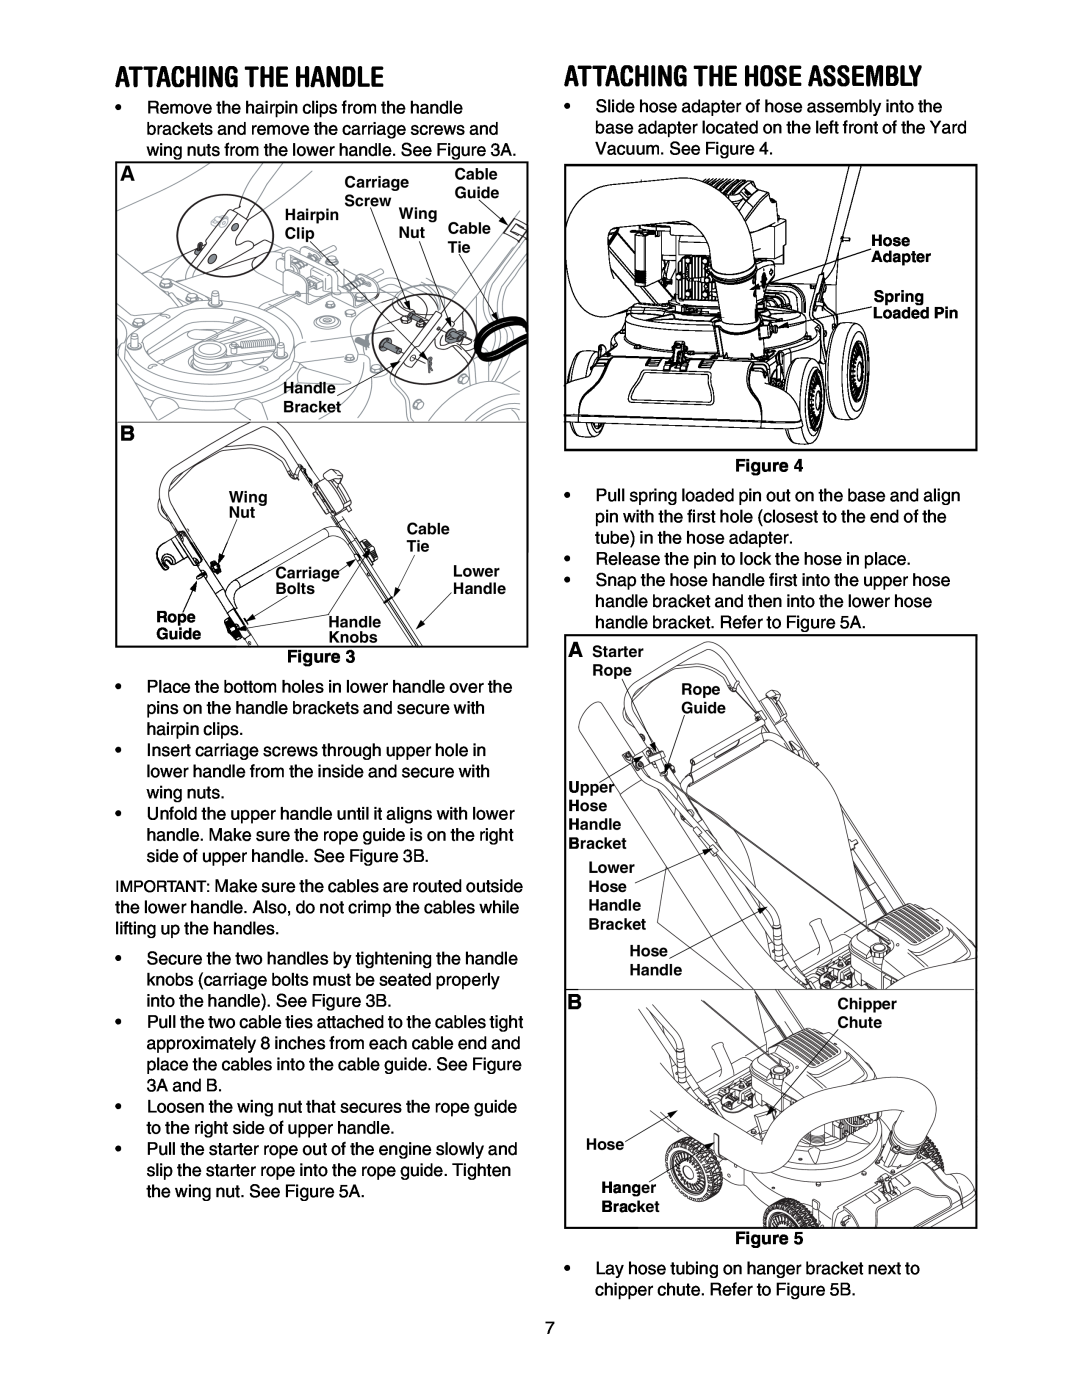 Craftsman 247.77099 operating instructions Attaching The Handle, Attaching The Hose Assembly, Figure 